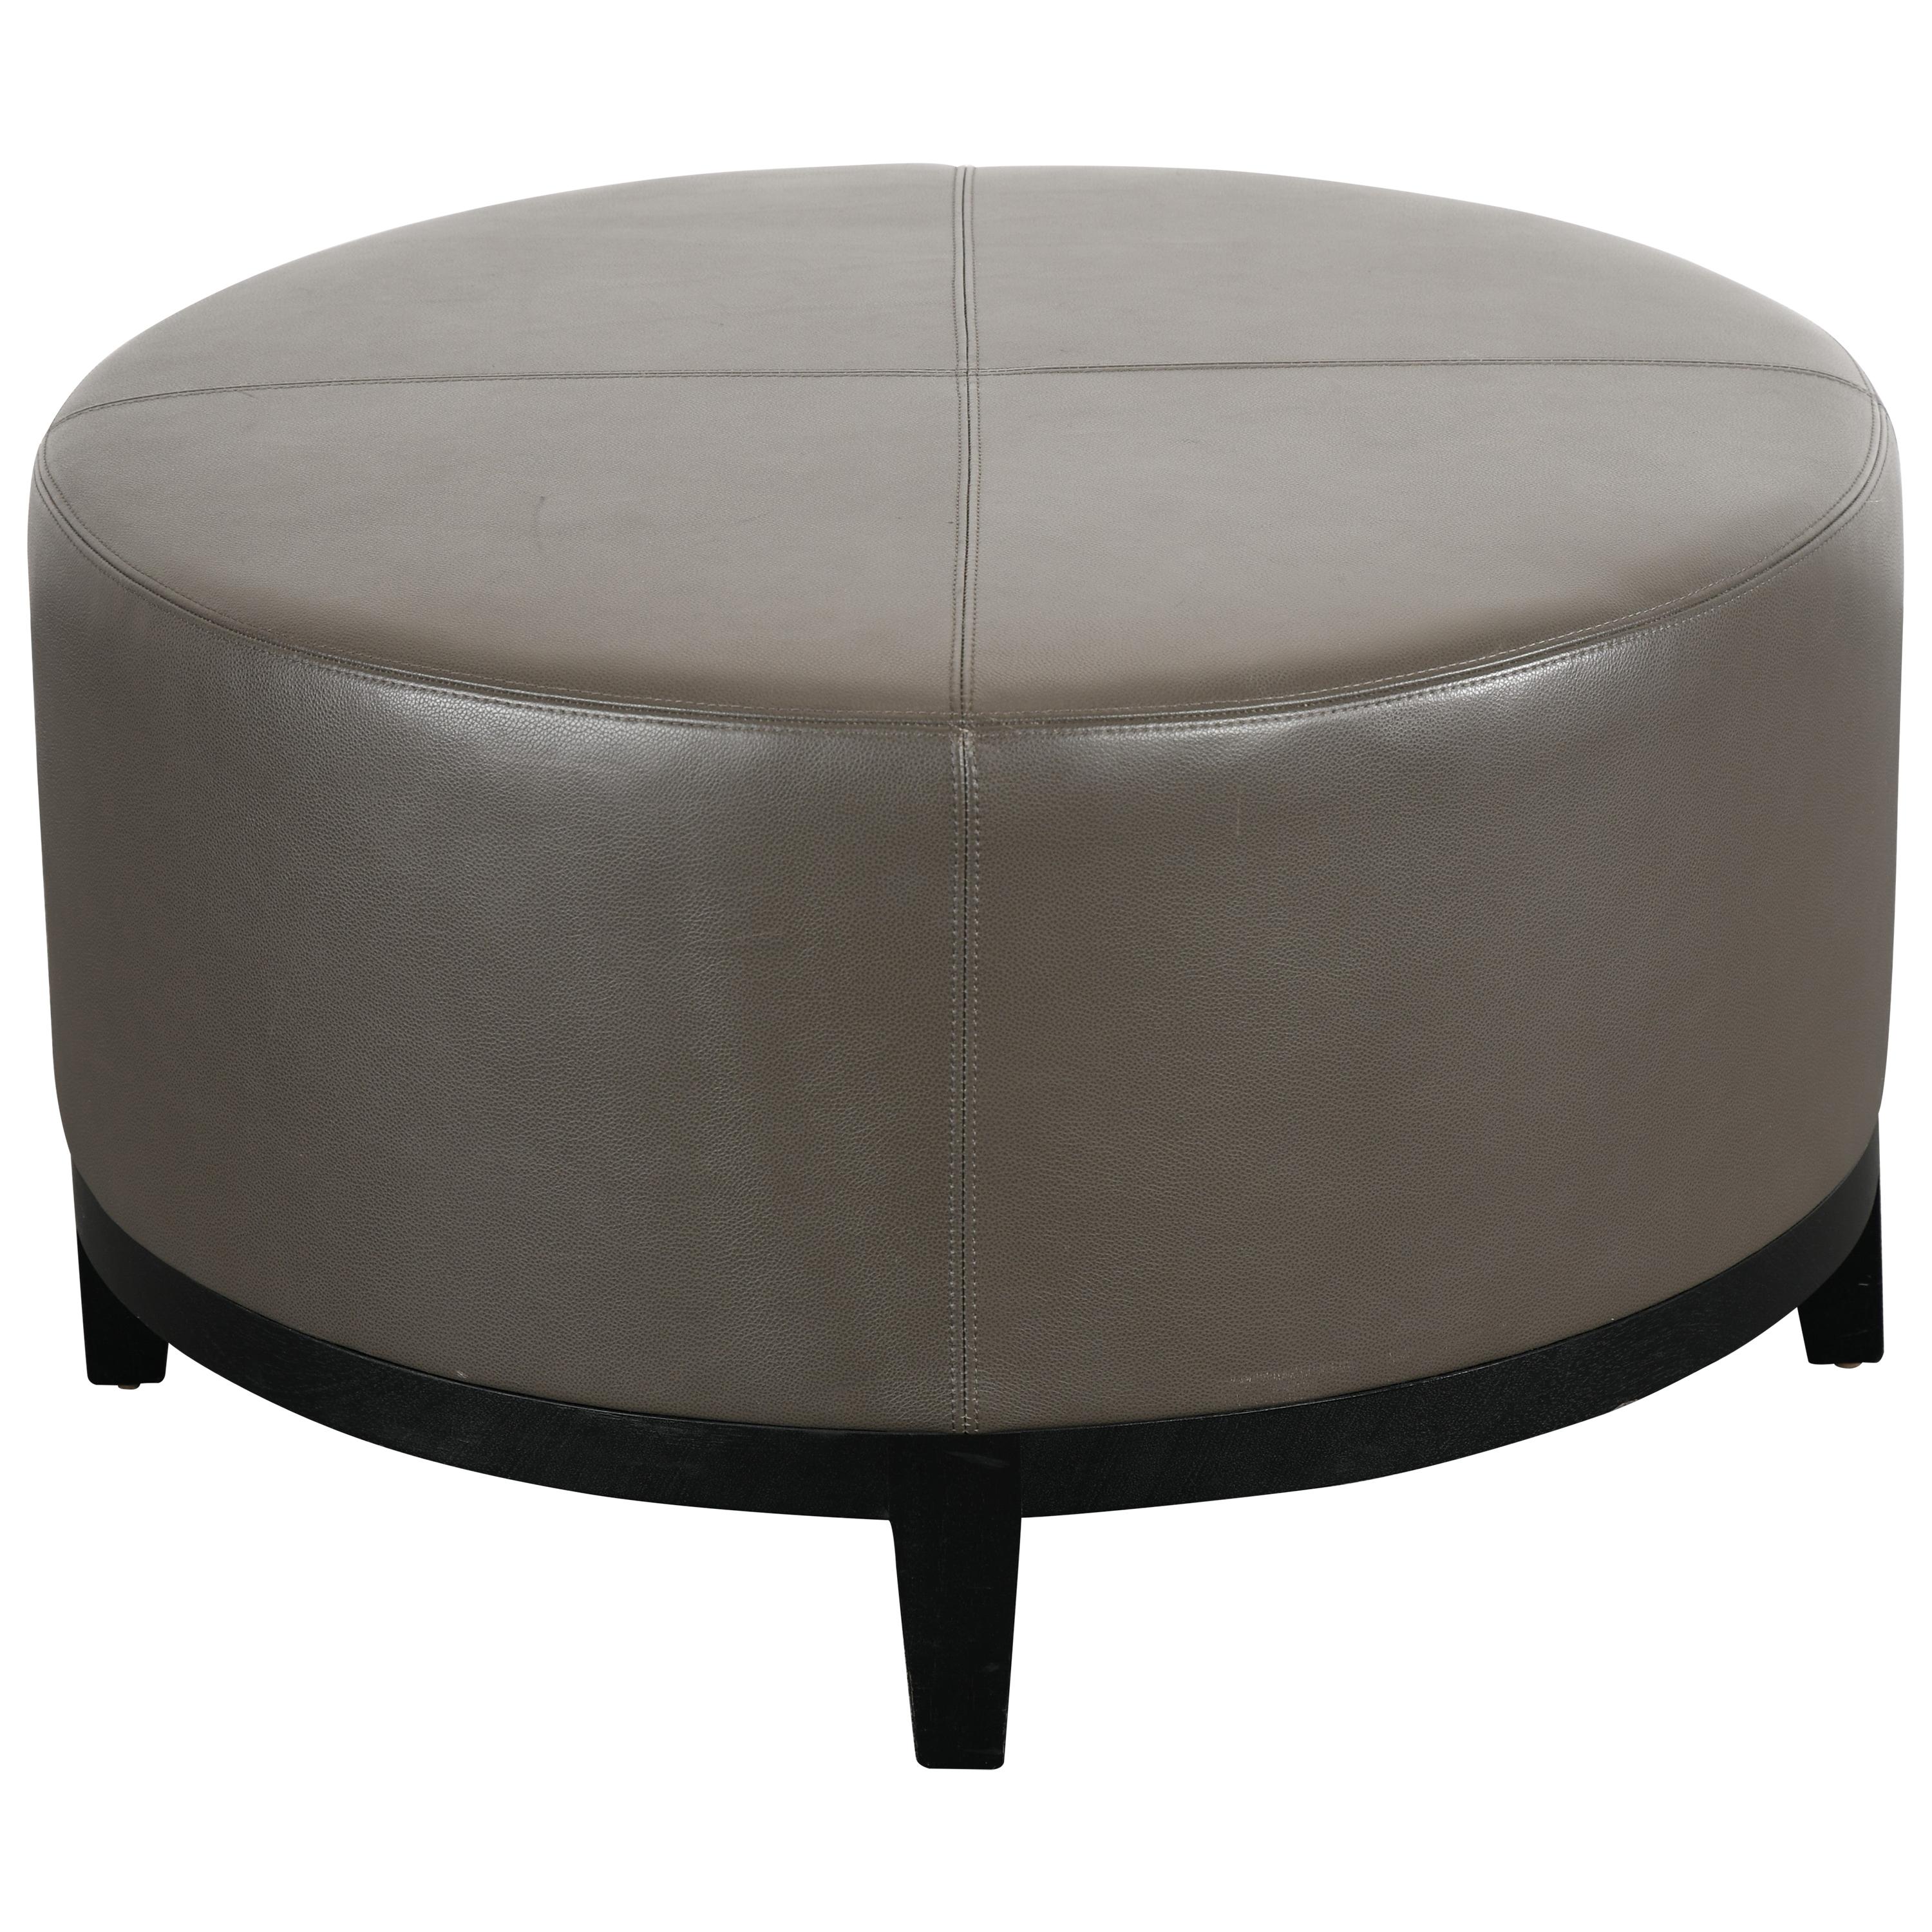 Christian Liaigre Round Ottoman for Holly Hunt, 1990s